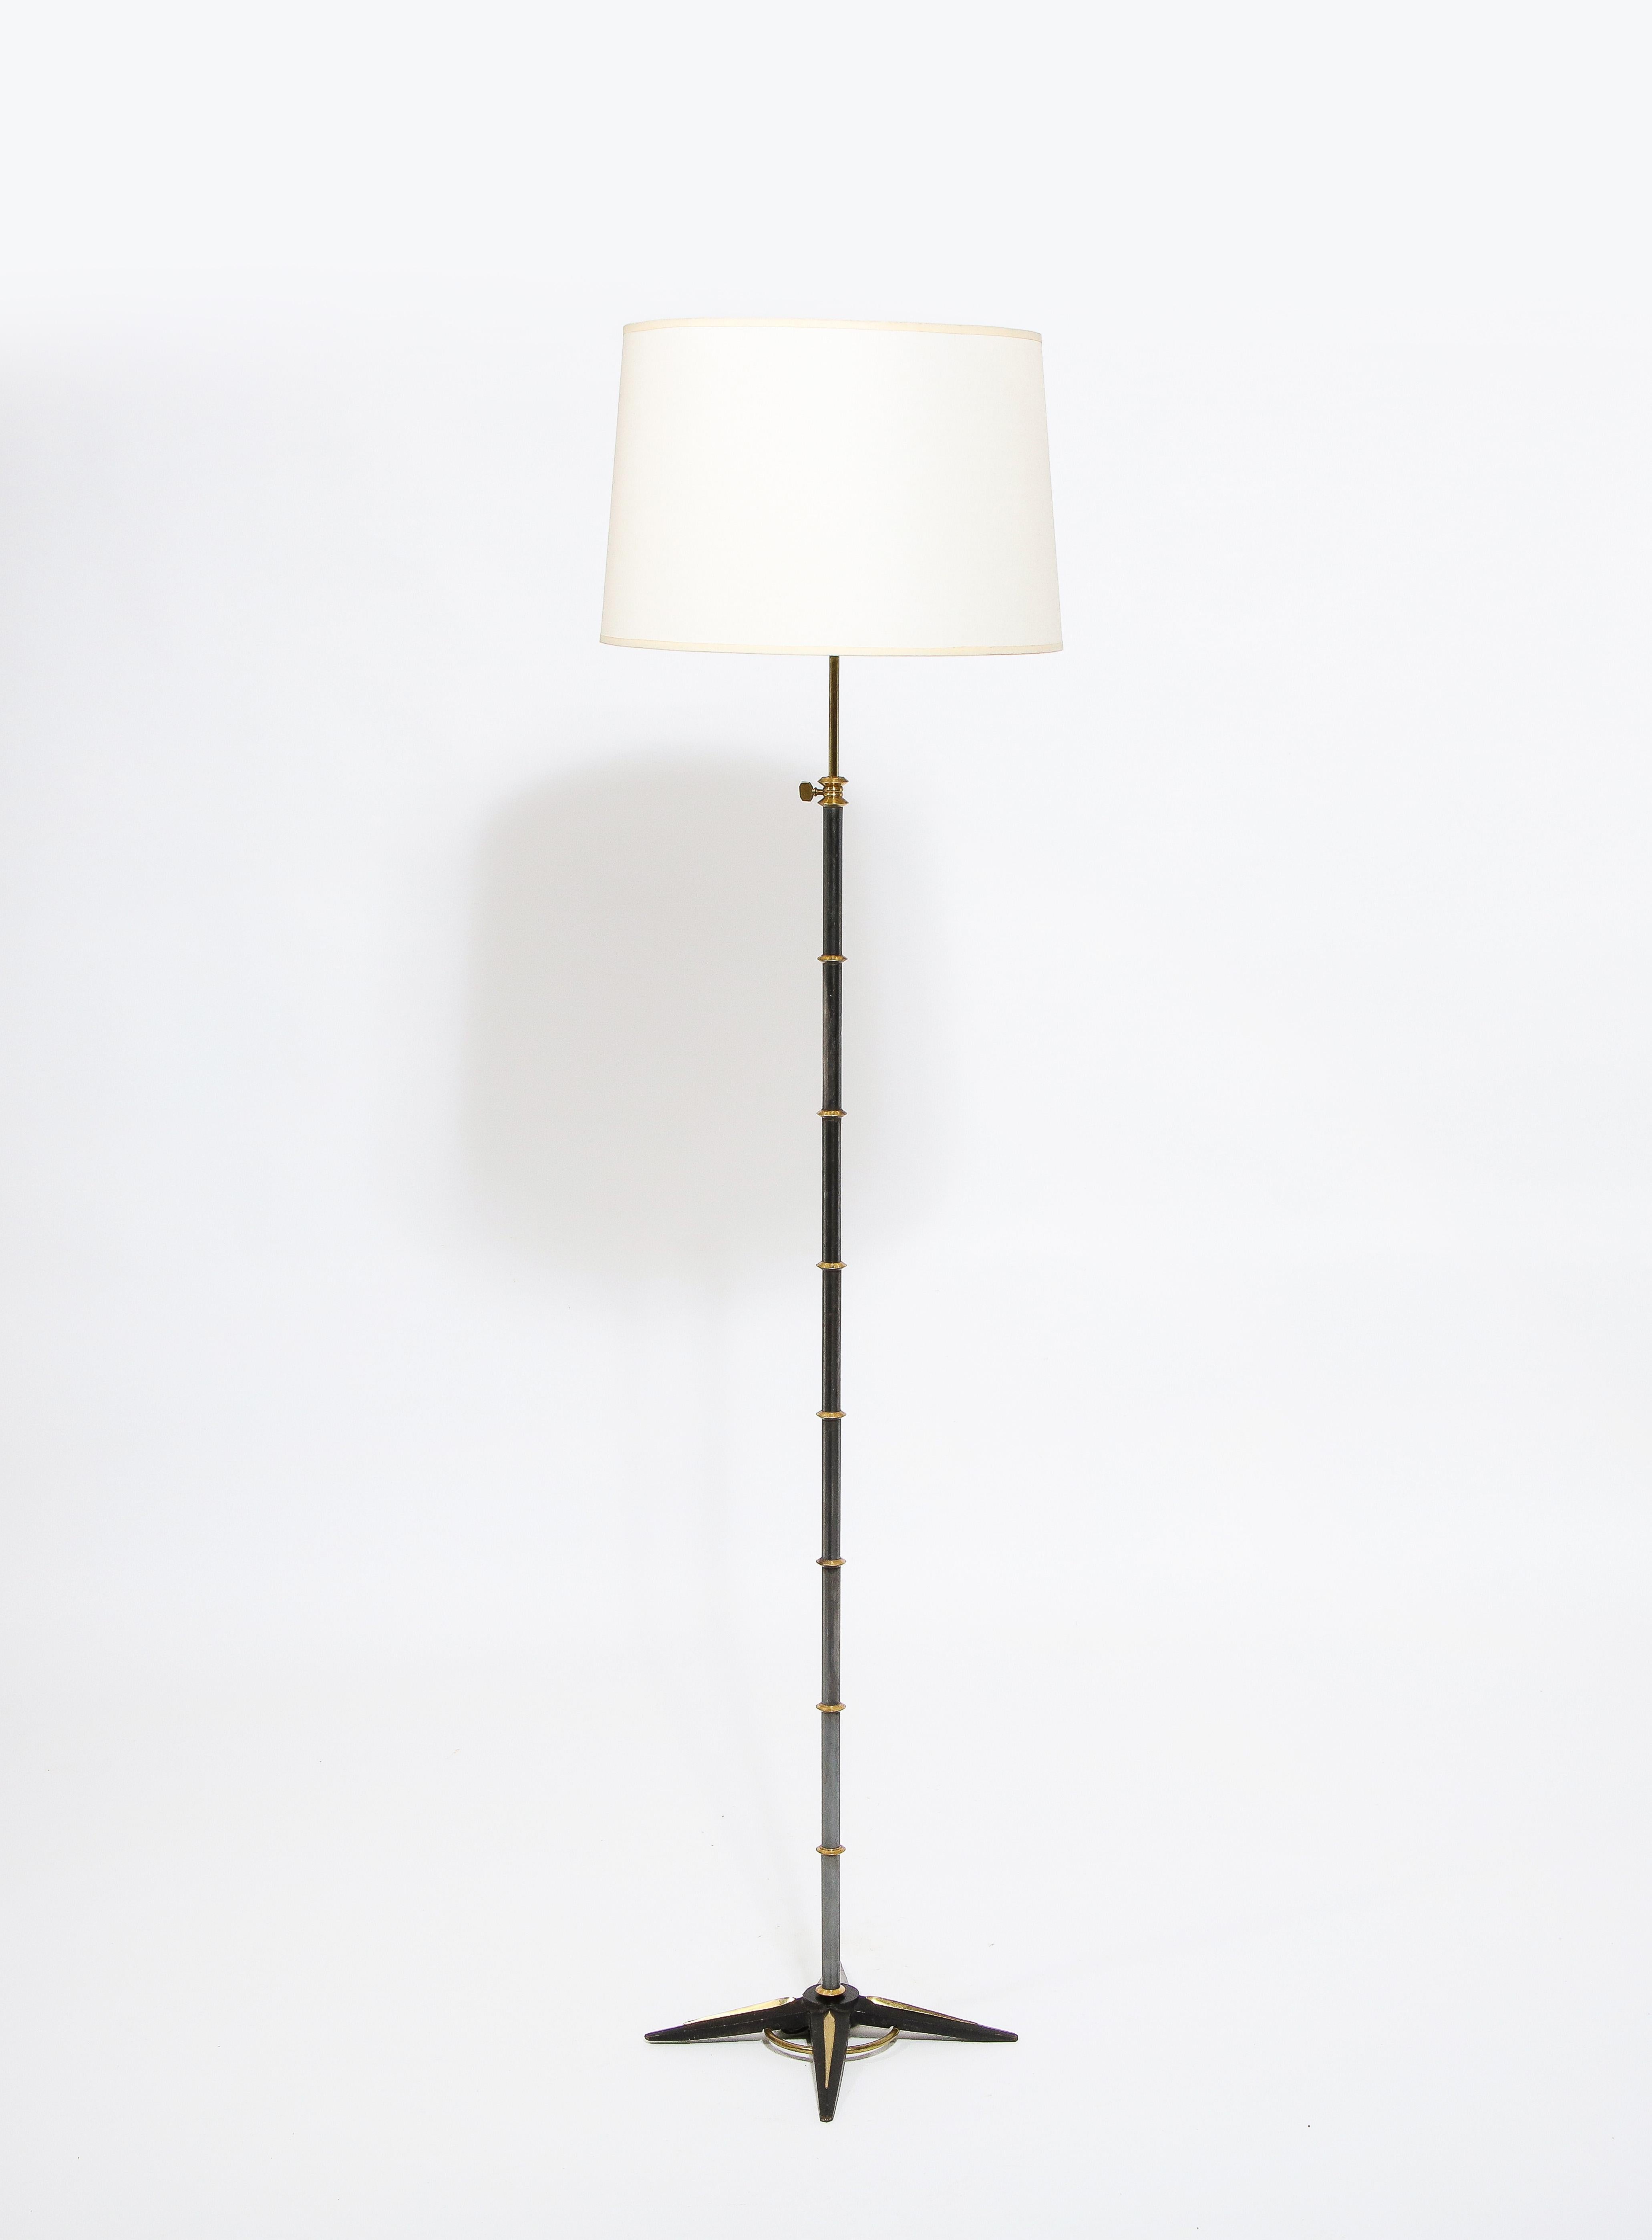 French Adjustable Height Floor Lamp by Gilles Sermadiras, France, 1950's For Sale